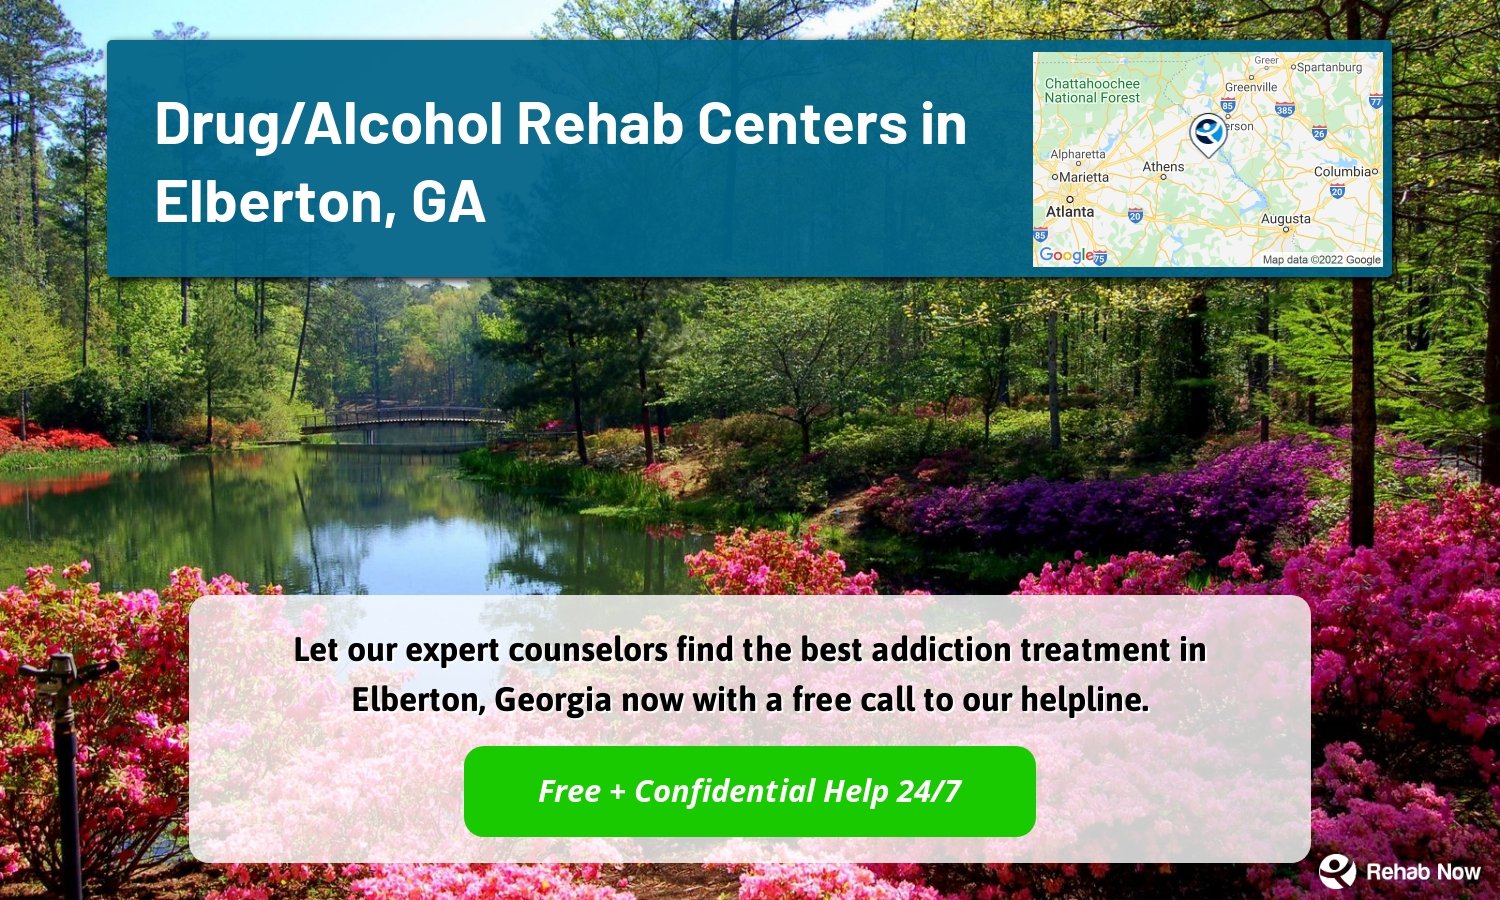 Let our expert counselors find the best addiction treatment in Elberton, Georgia now with a free call to our helpline.